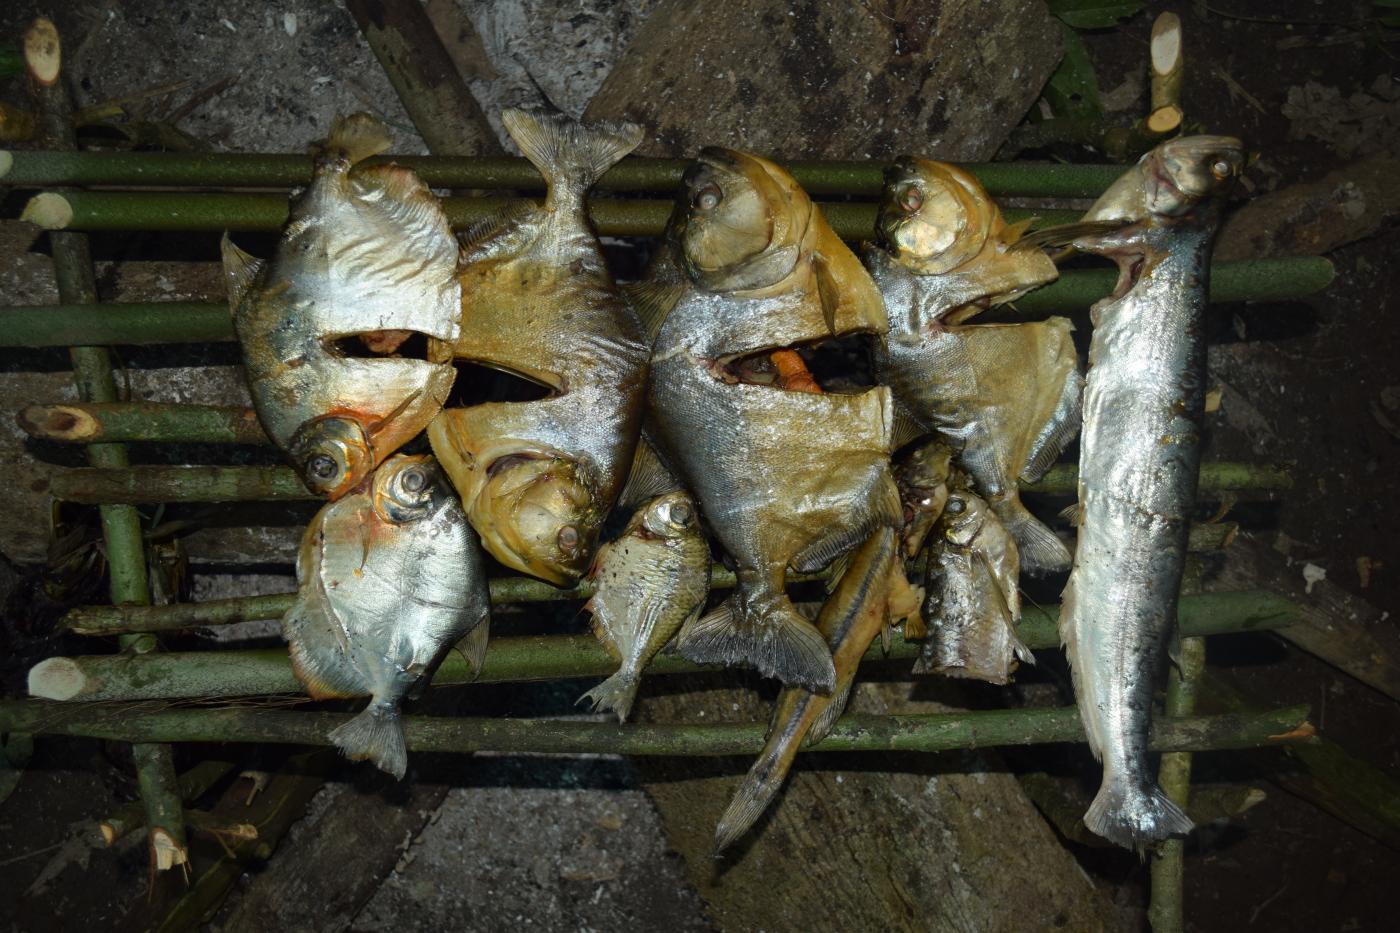 A variety of fish roasting on a grill constructed from pieces of bamboo